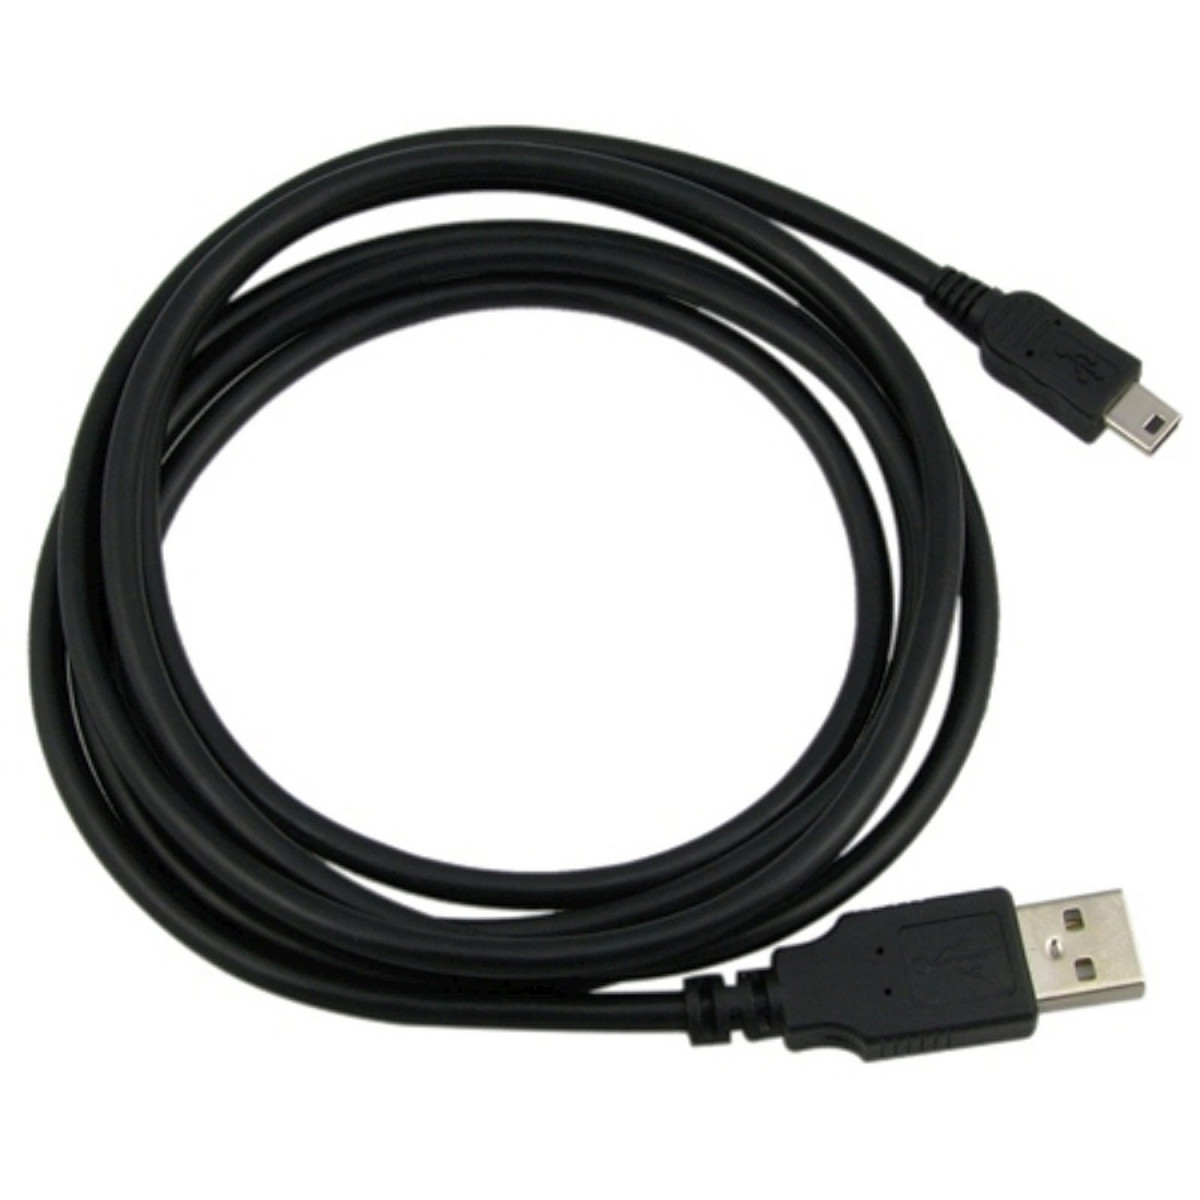 lunling usb computer mac data sync charger cable cord for blue yeti recording microphones mic